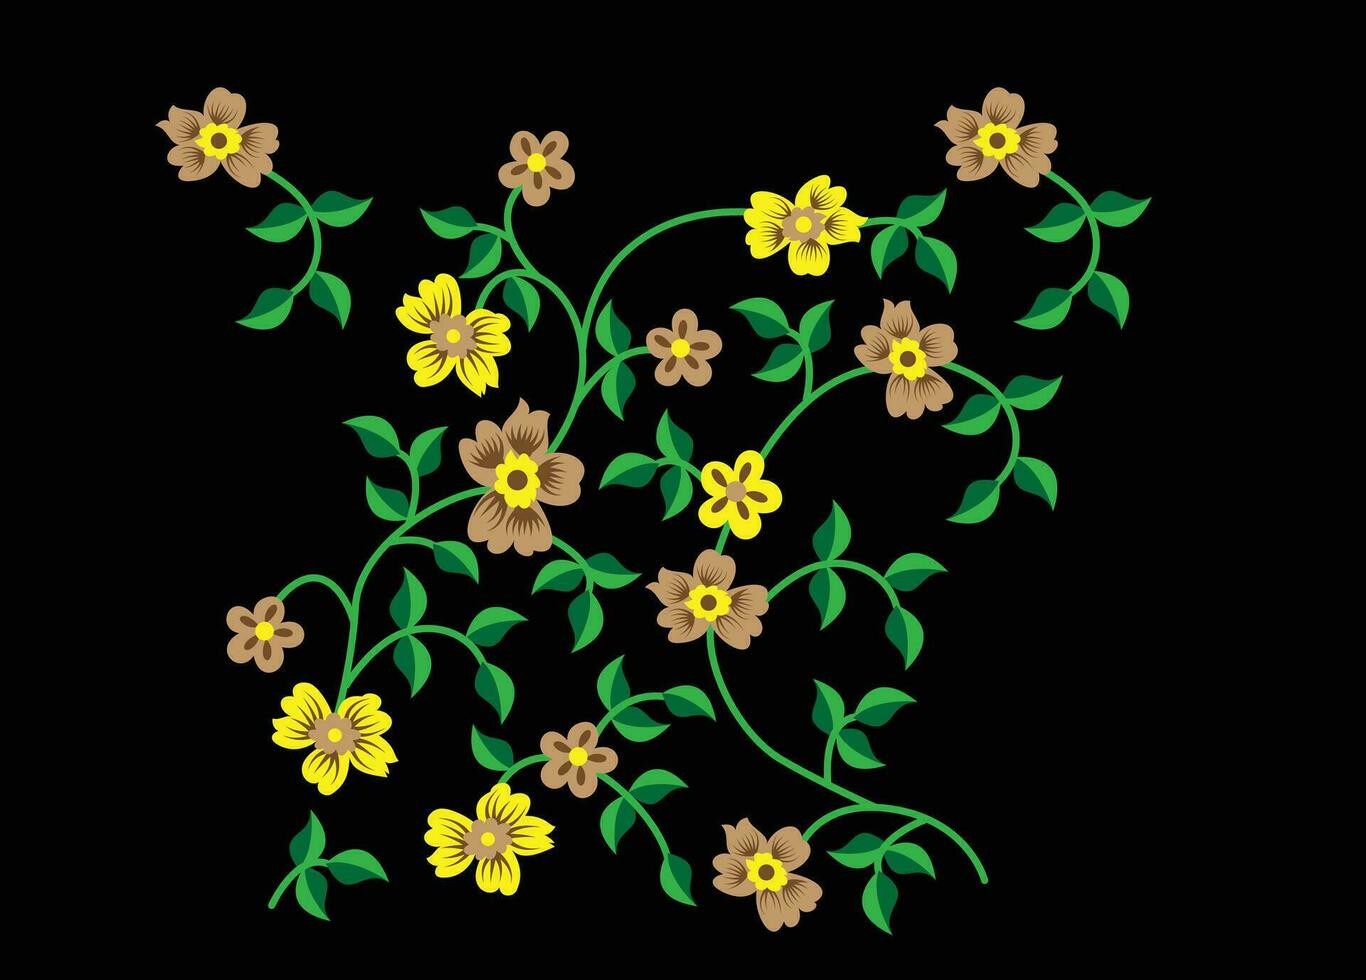 A yellow and brown flowers on a black background vector